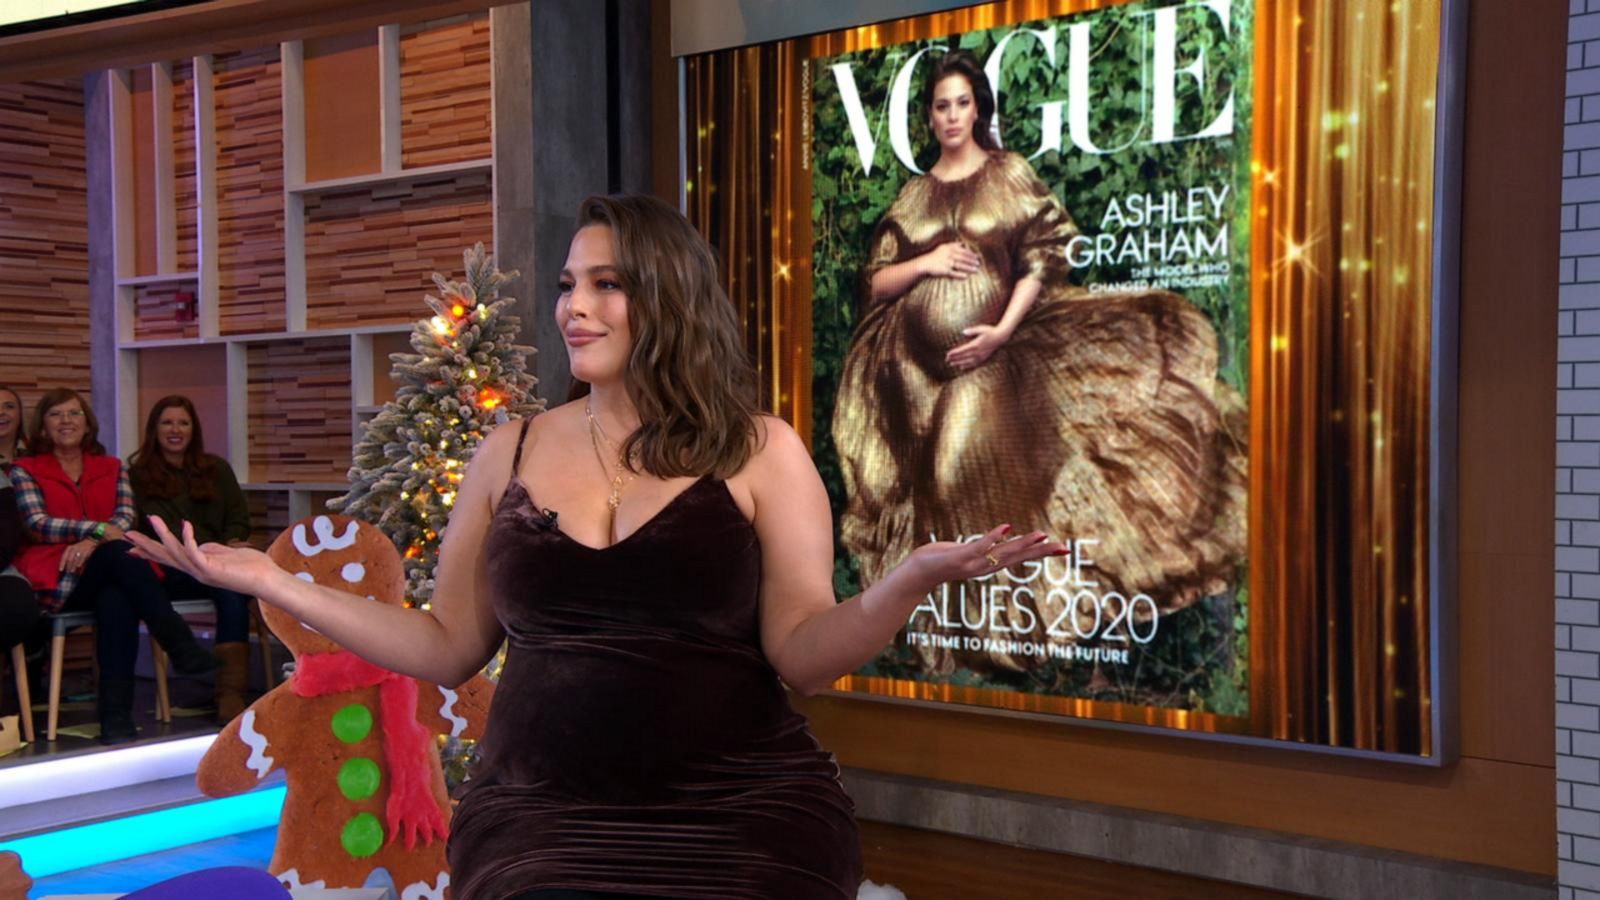 Ashley Graham just responded to her Vogue cover controversy